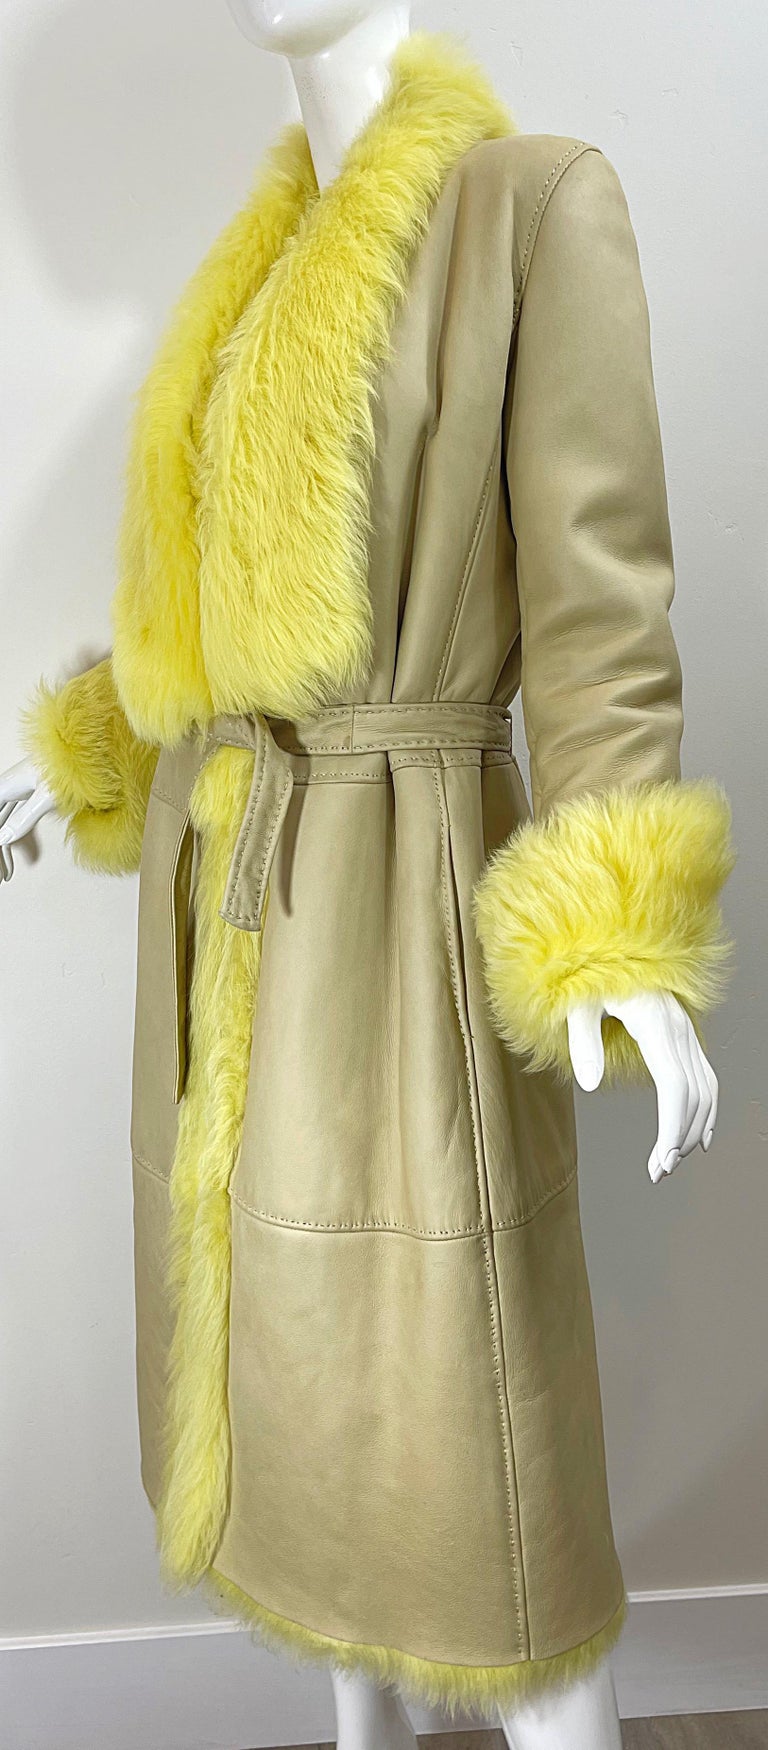 1990s Gianni Versace Tan Leather Yellow Shearling Fur Vintage Trench Coat Jacket For Sale 5